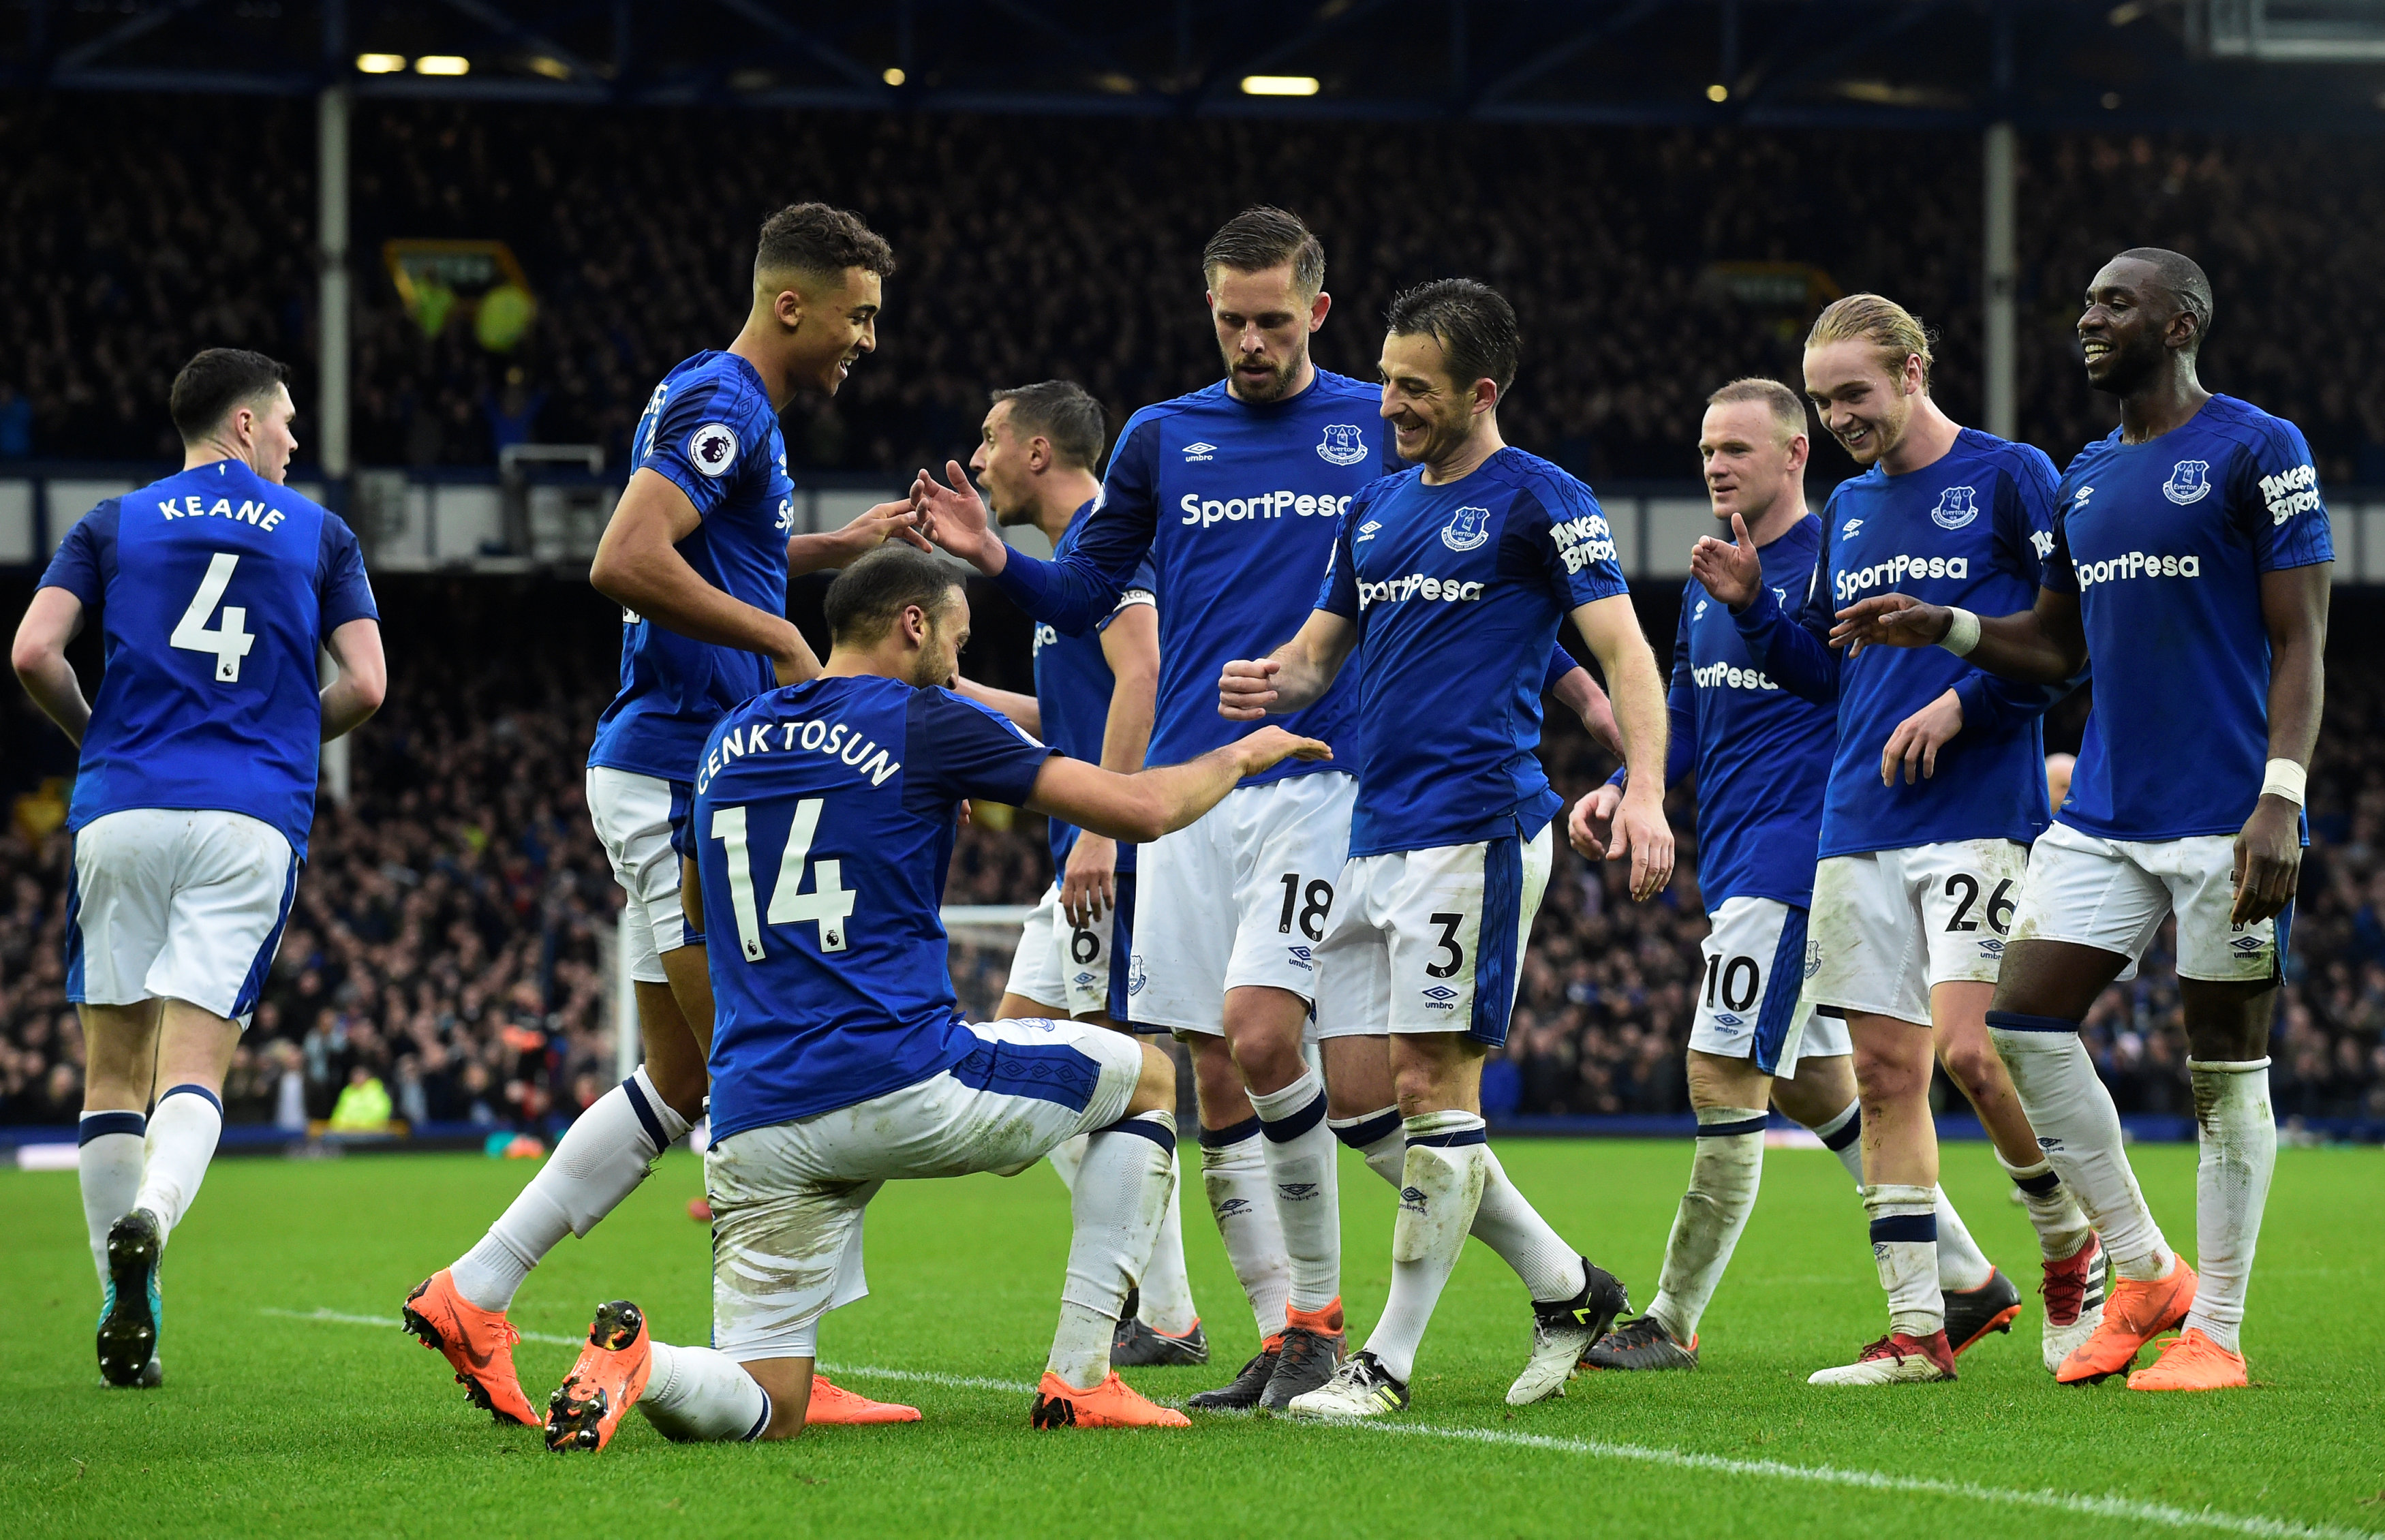 Football: Everton cruise to victory despite Rooney penalty miss